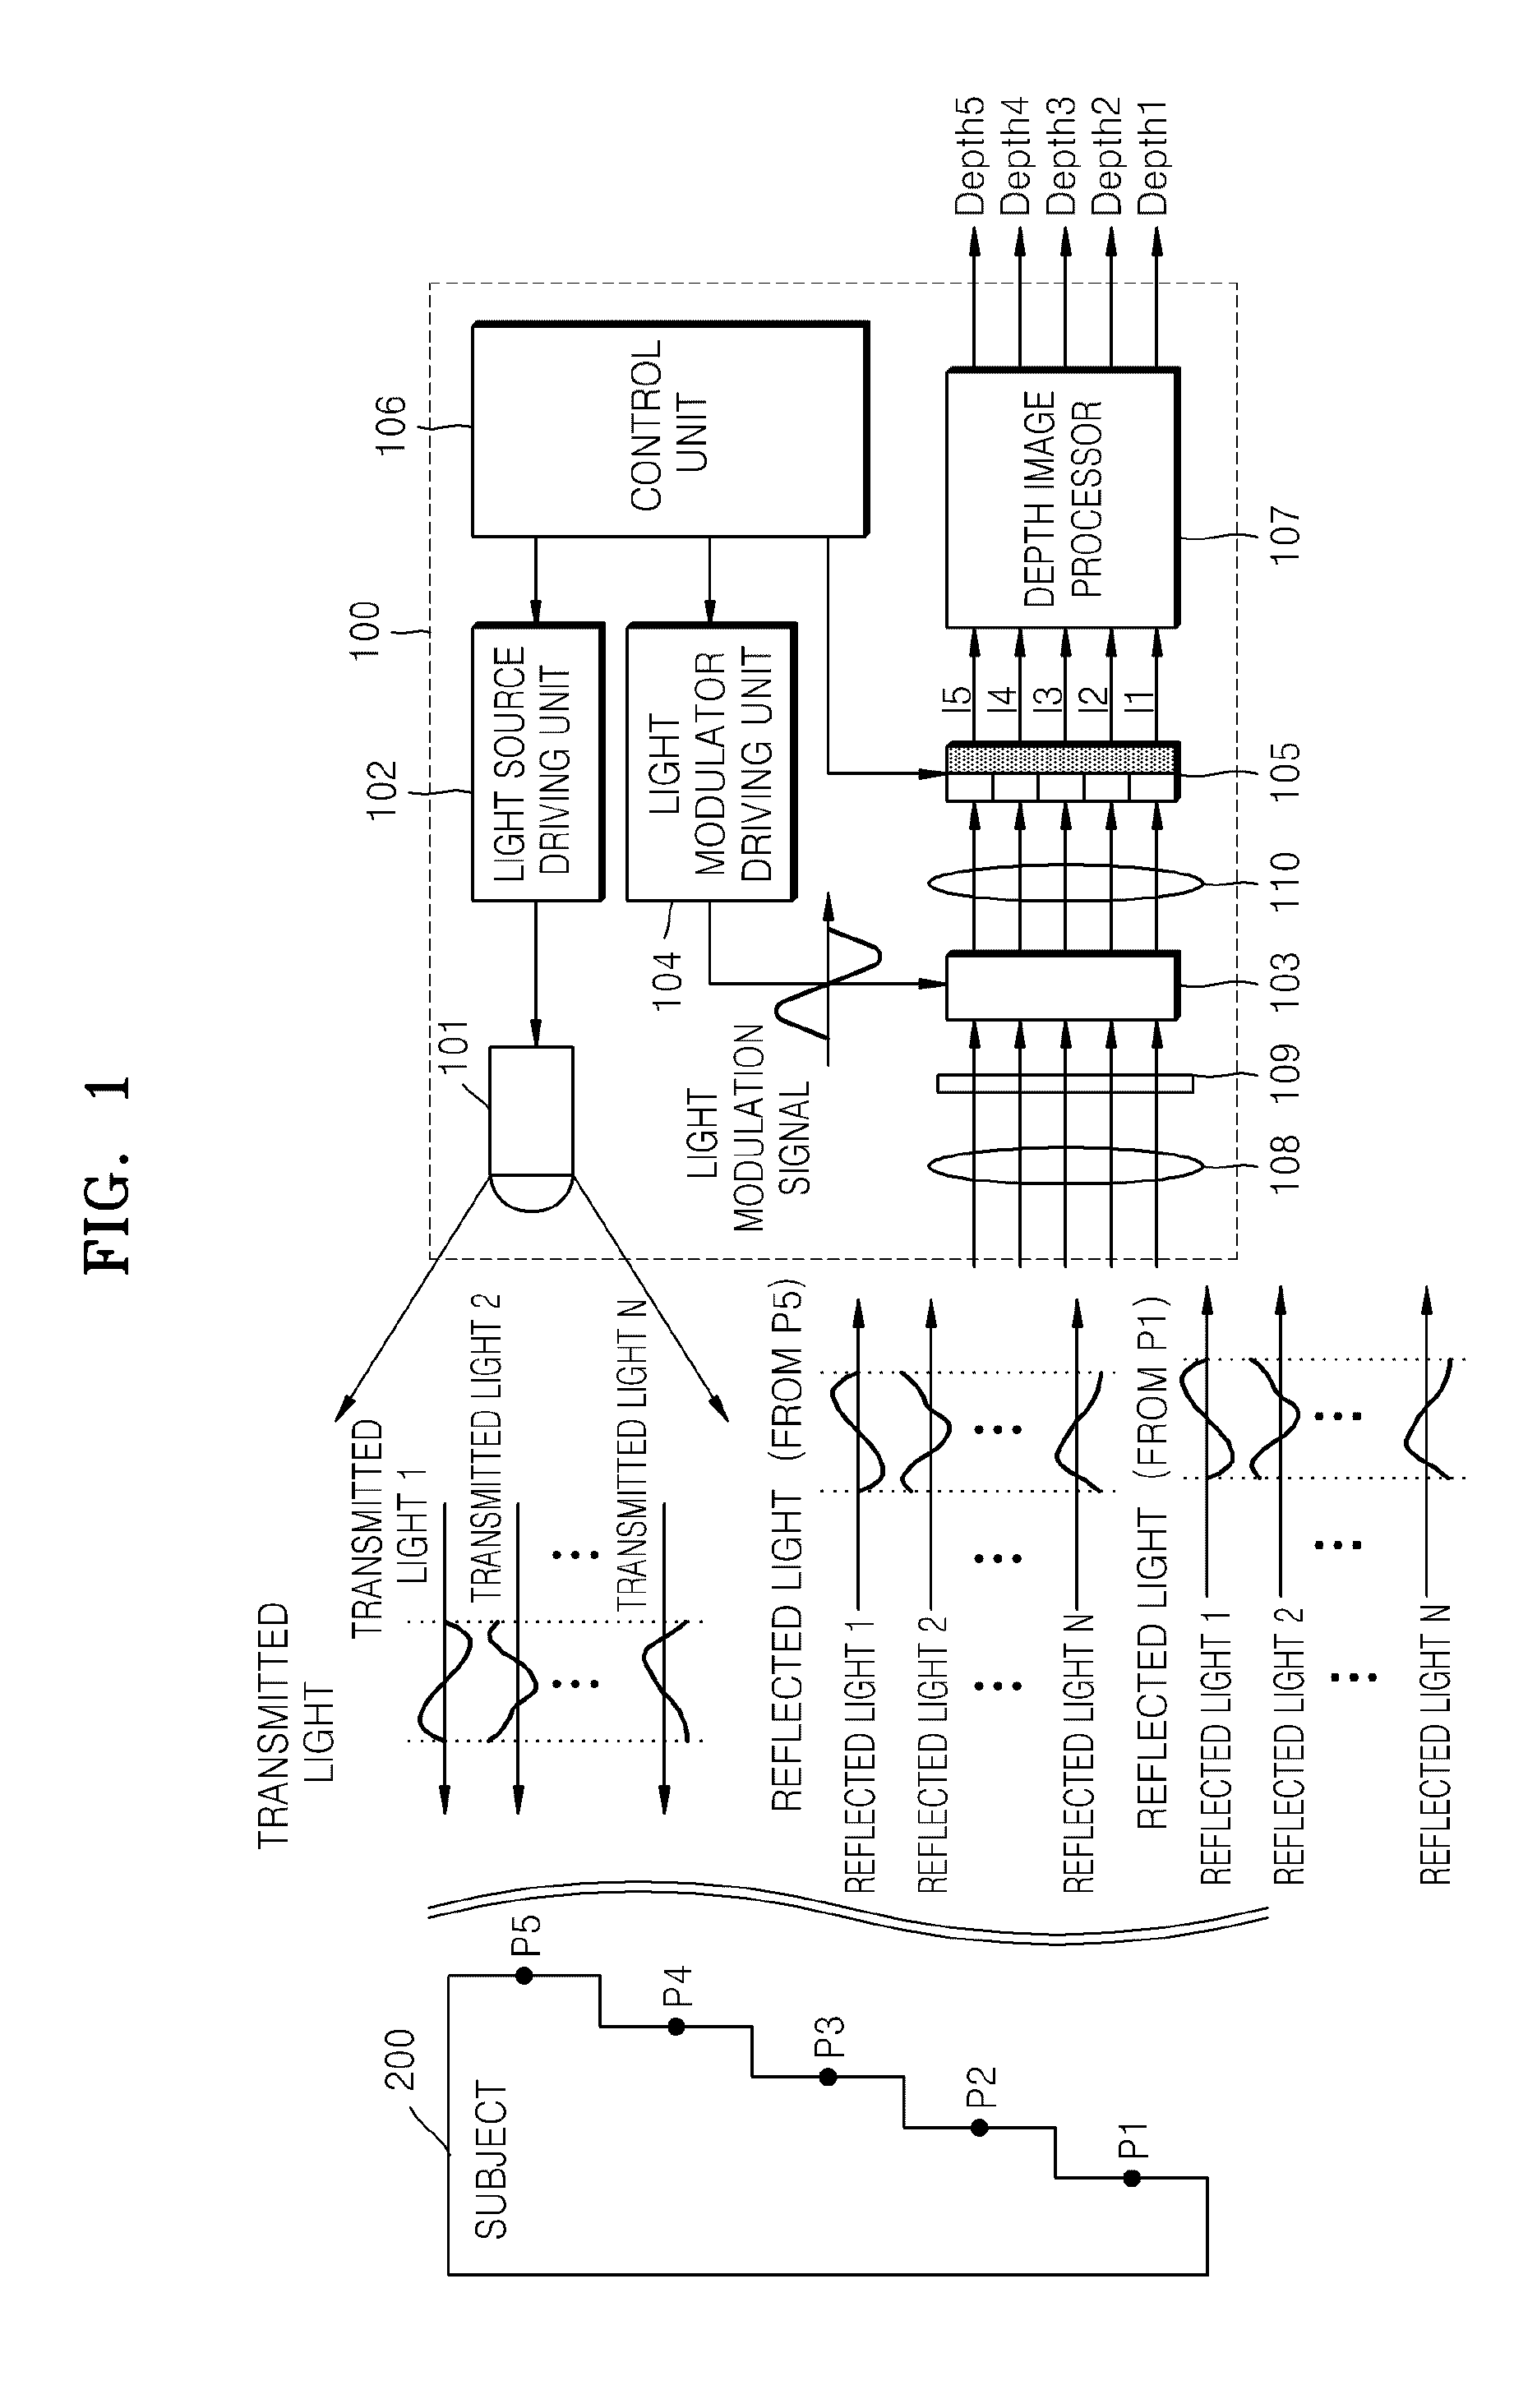 3D image acquisition apparatus and method of generating depth image in the 3D image acquisition apparatus